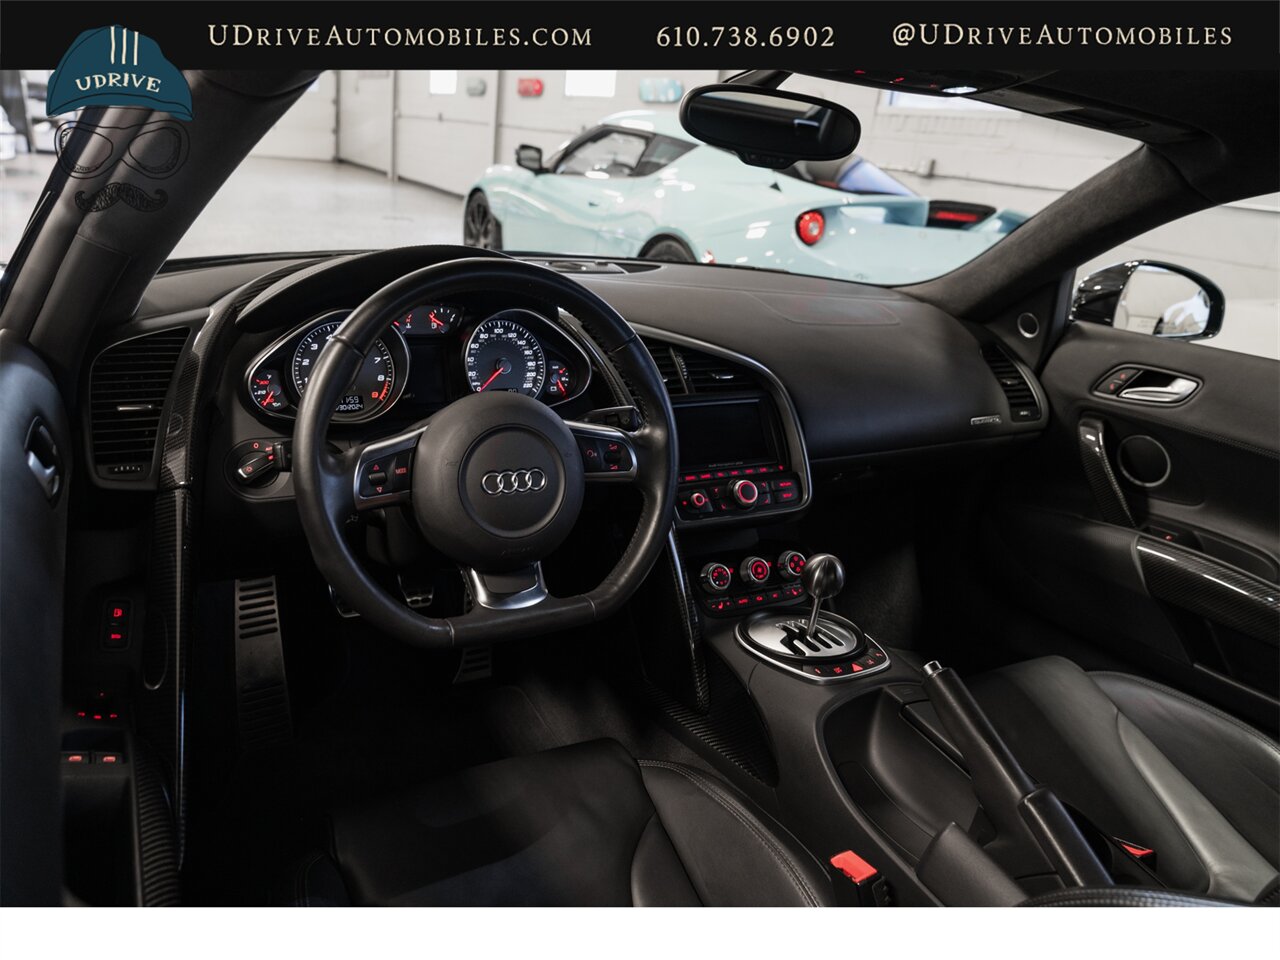 2009 Audi R8 Quattro  4.2L V8 6 Speed Manual - Photo 32 - West Chester, PA 19382